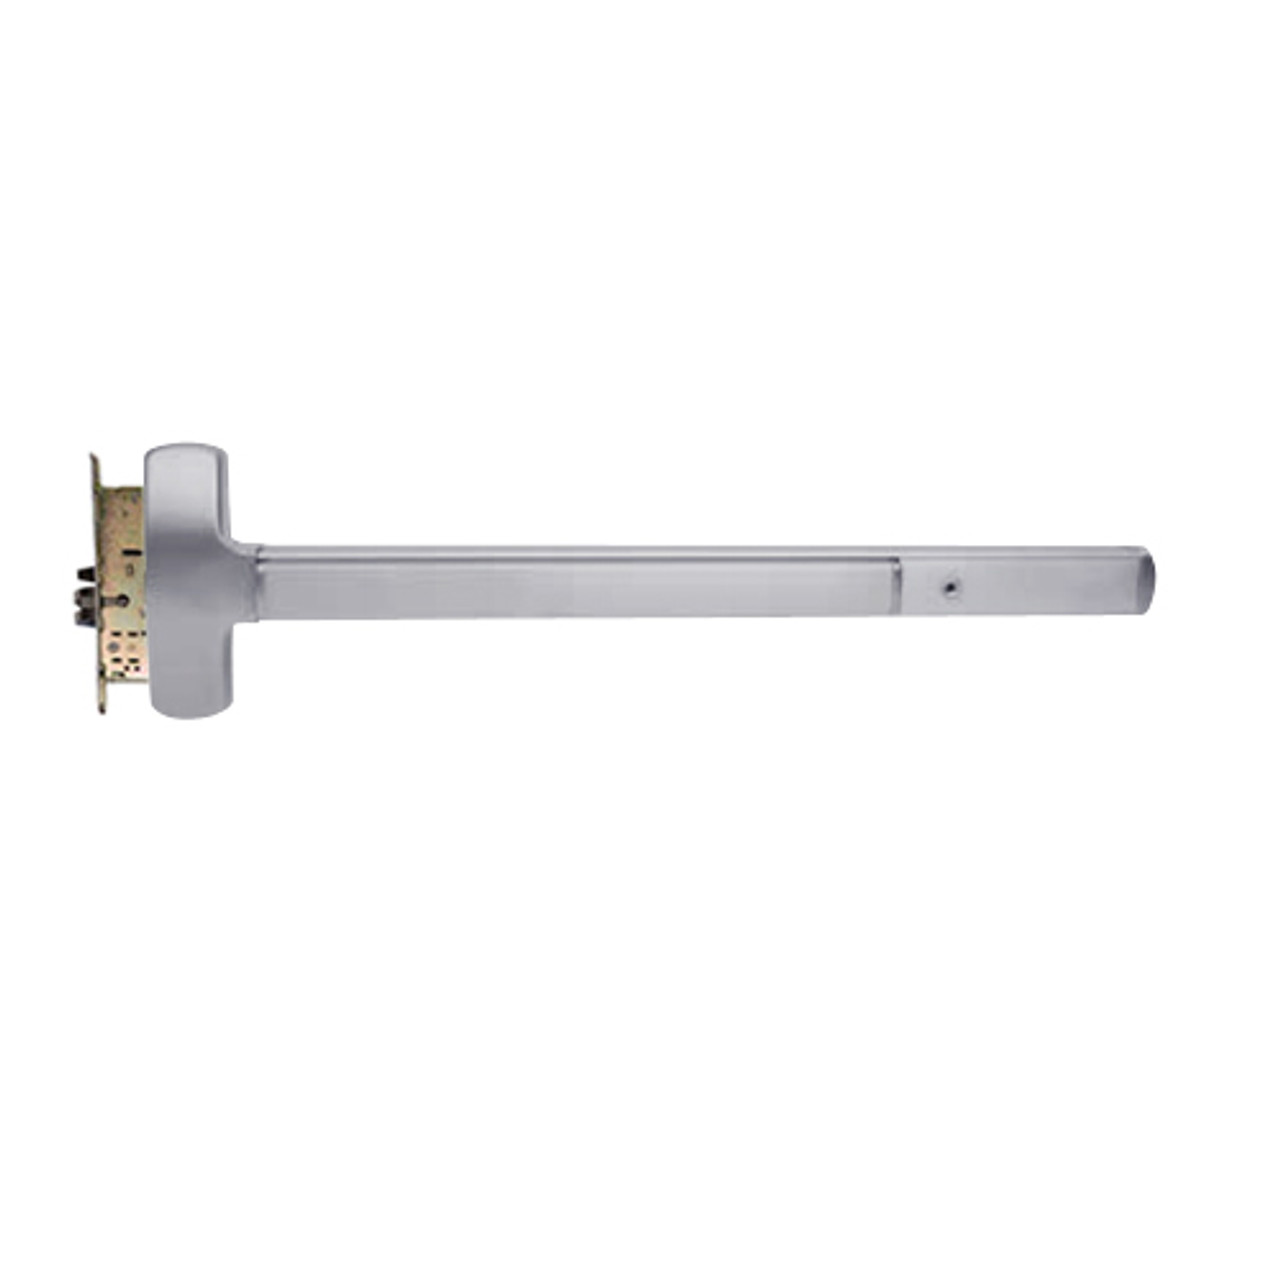 25-M-EO-US26D-3-LHR Falcon Exit Device in Satin Chrome